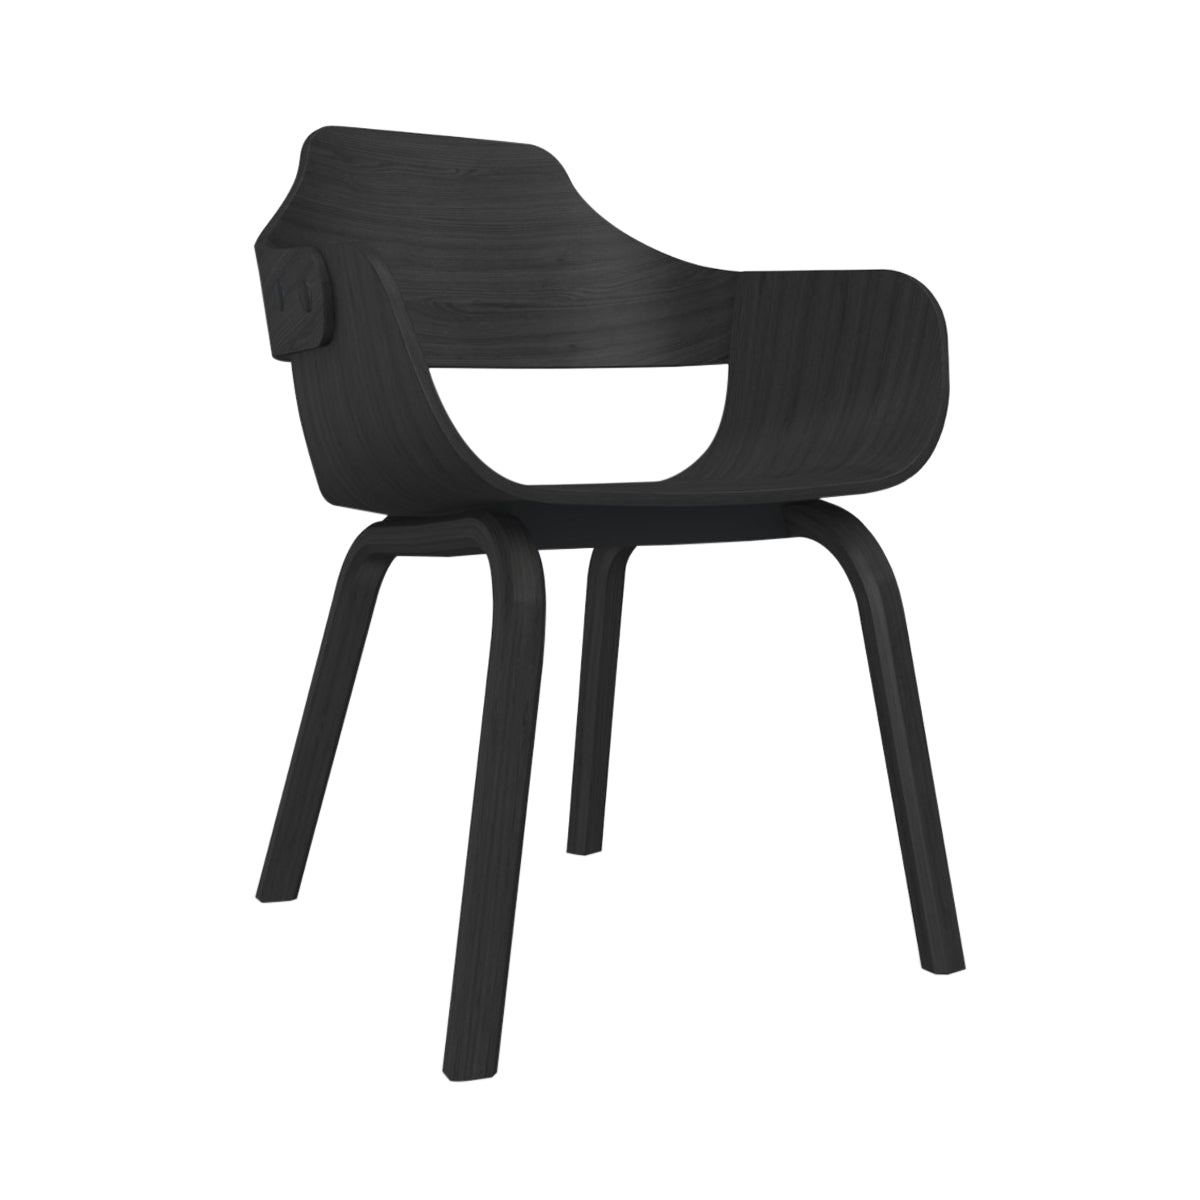 Showtime Chair: Ash Stained Black